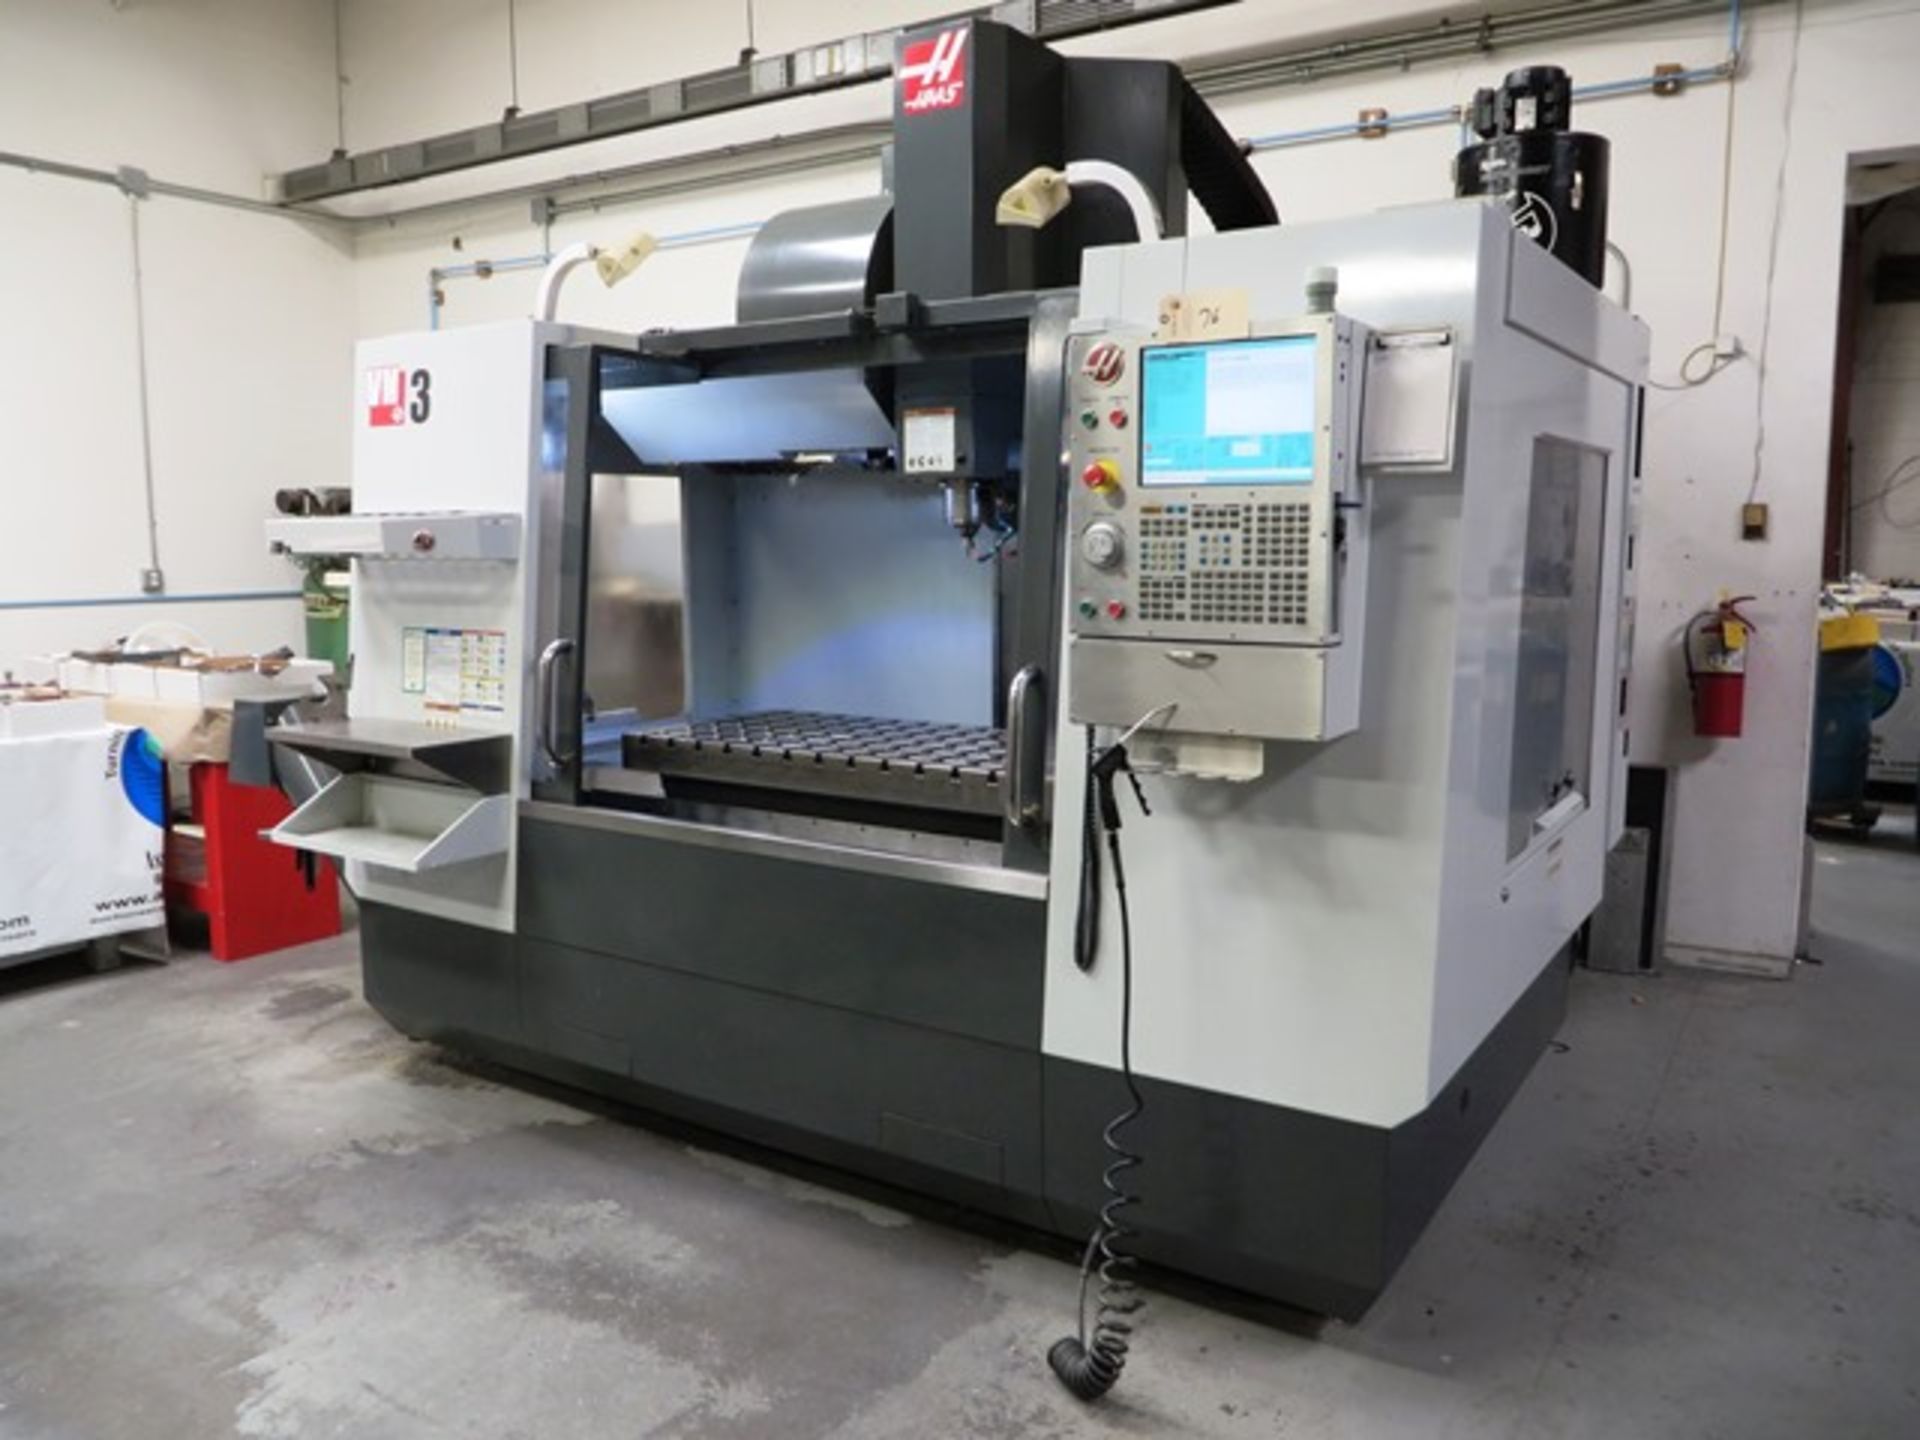 HAAS VM3 4-Axis CNC Vertical Machining Center - Image 6 of 8